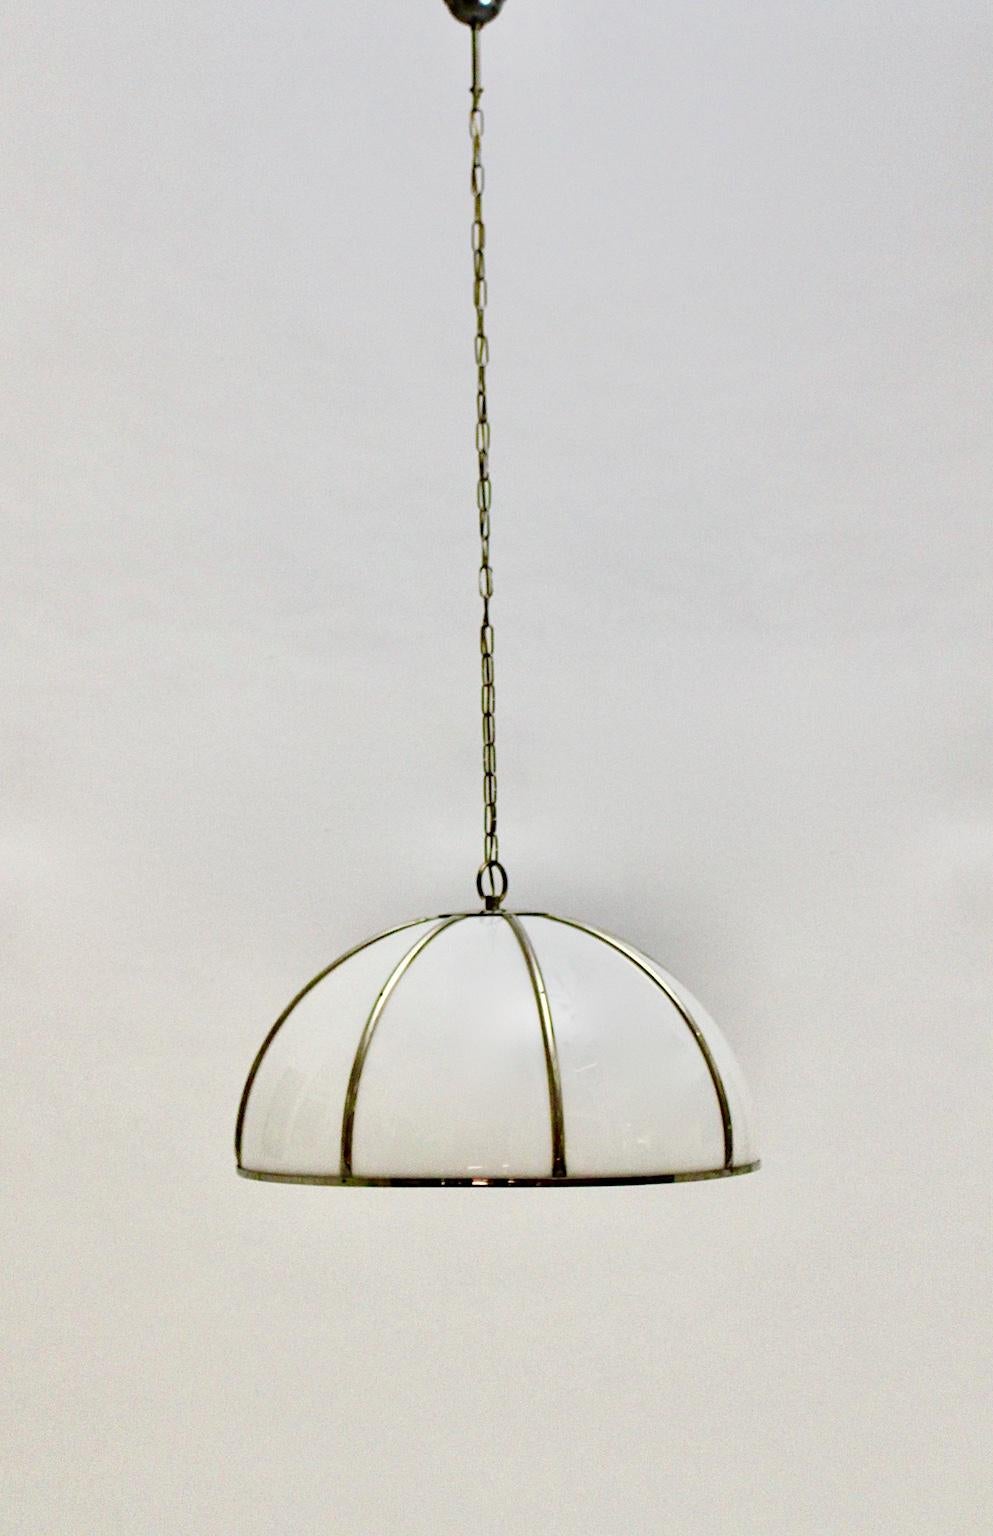 Gabriella Crespi vintage brass nickel plexiglass chandelier or pendant Fungo designed 1970s Italy.
Gabriella Crespi (1922-2017)
Gabriella Crespi presented her collections in Milan in the 1950s. Tiffany and Dior appreciated her glamorous design